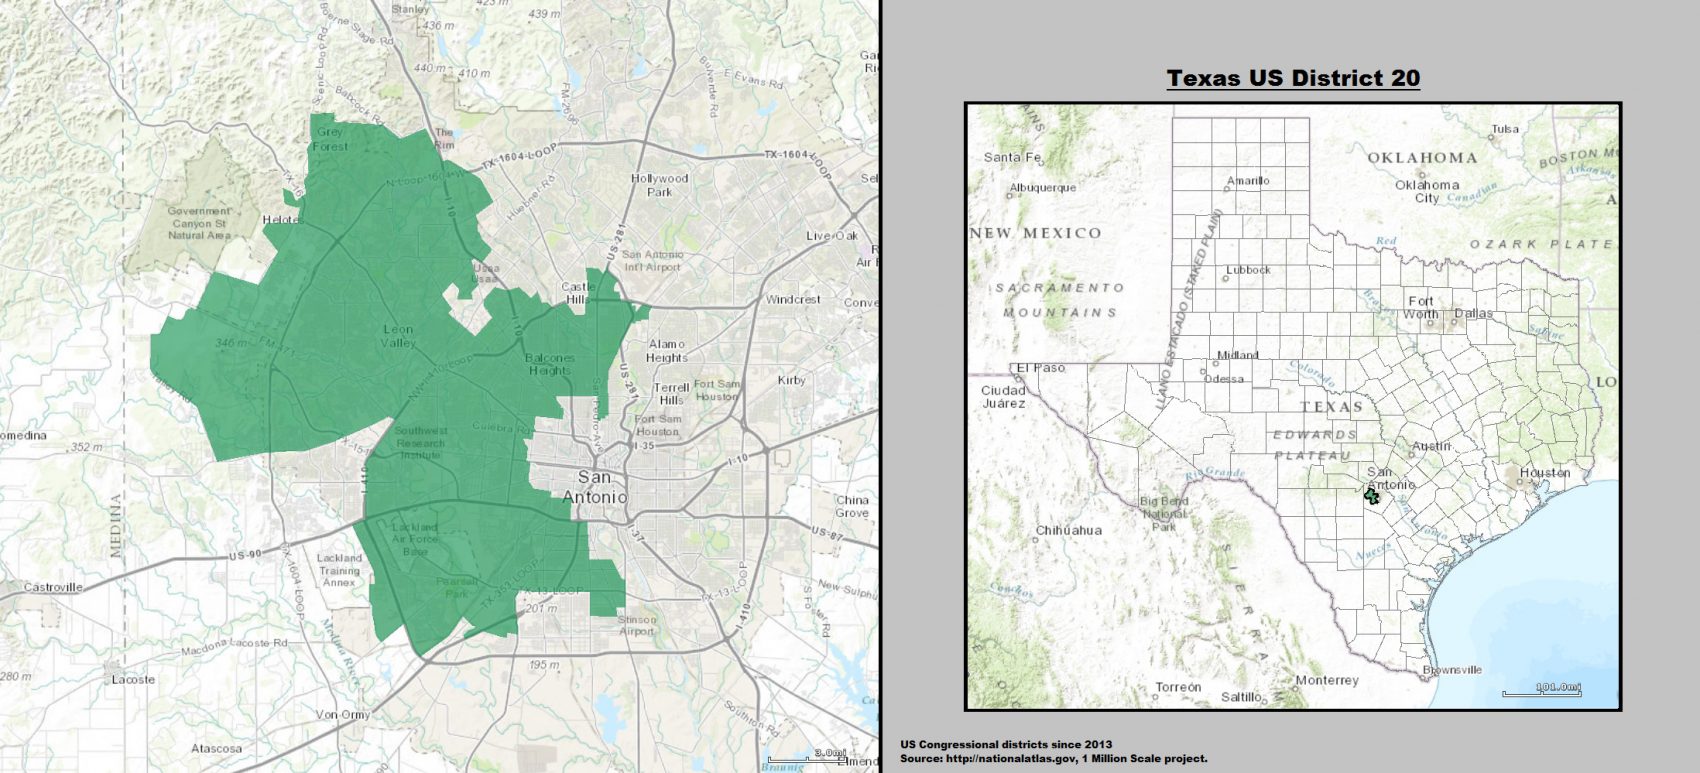 Texas US Congressional District 20 since 2013